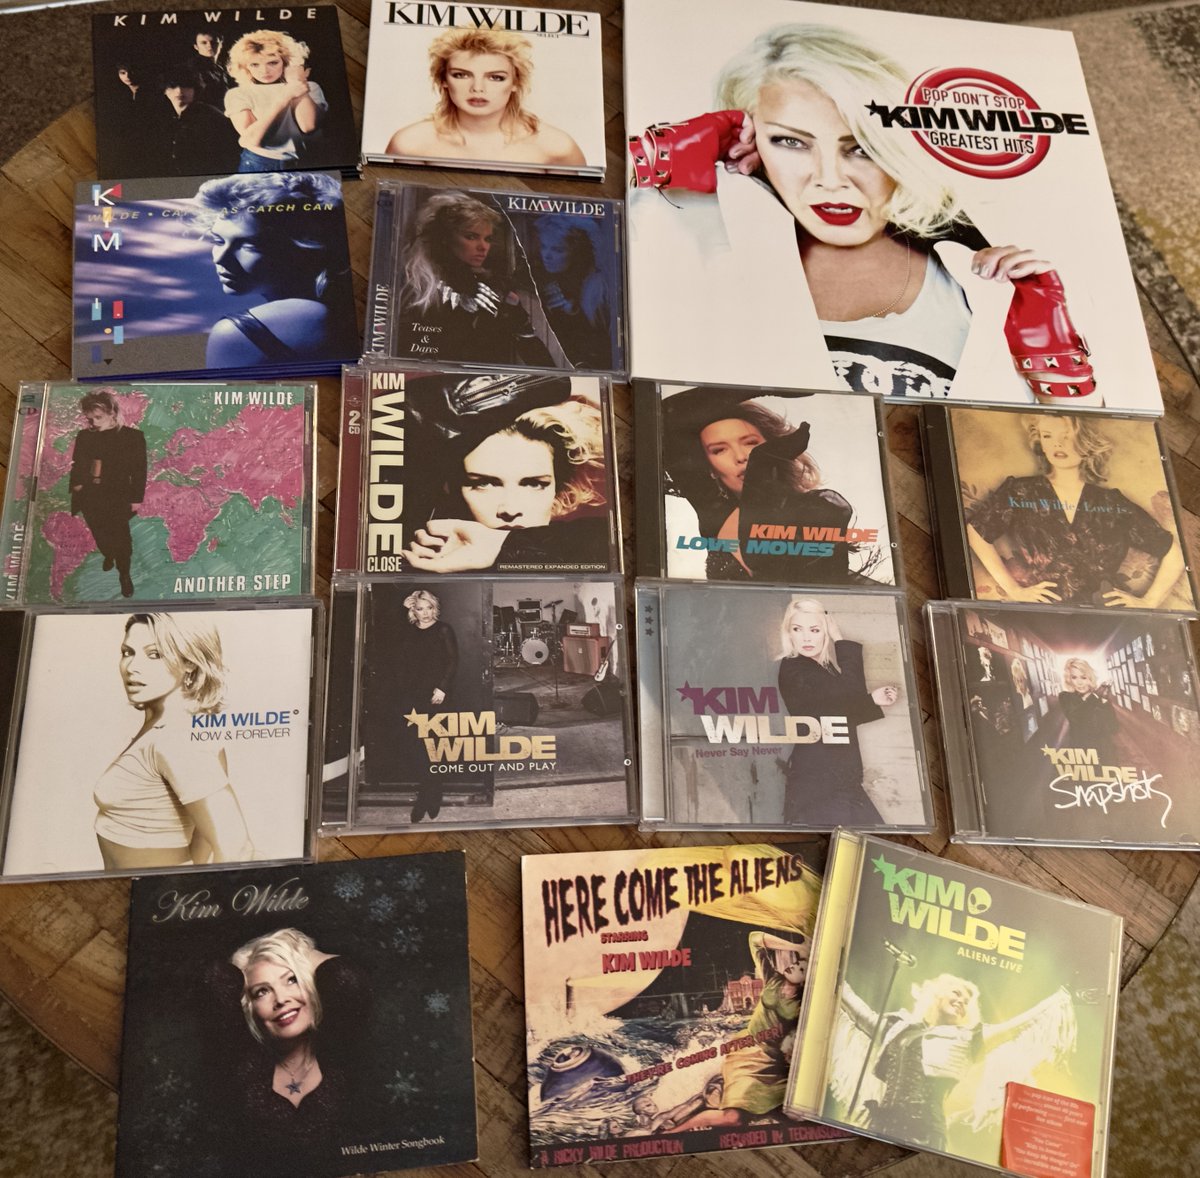 Updated #KimWilde Collection
Finally got all the studio albums on CD 😍
#Music #PopMusic #Pop #MusicCollection